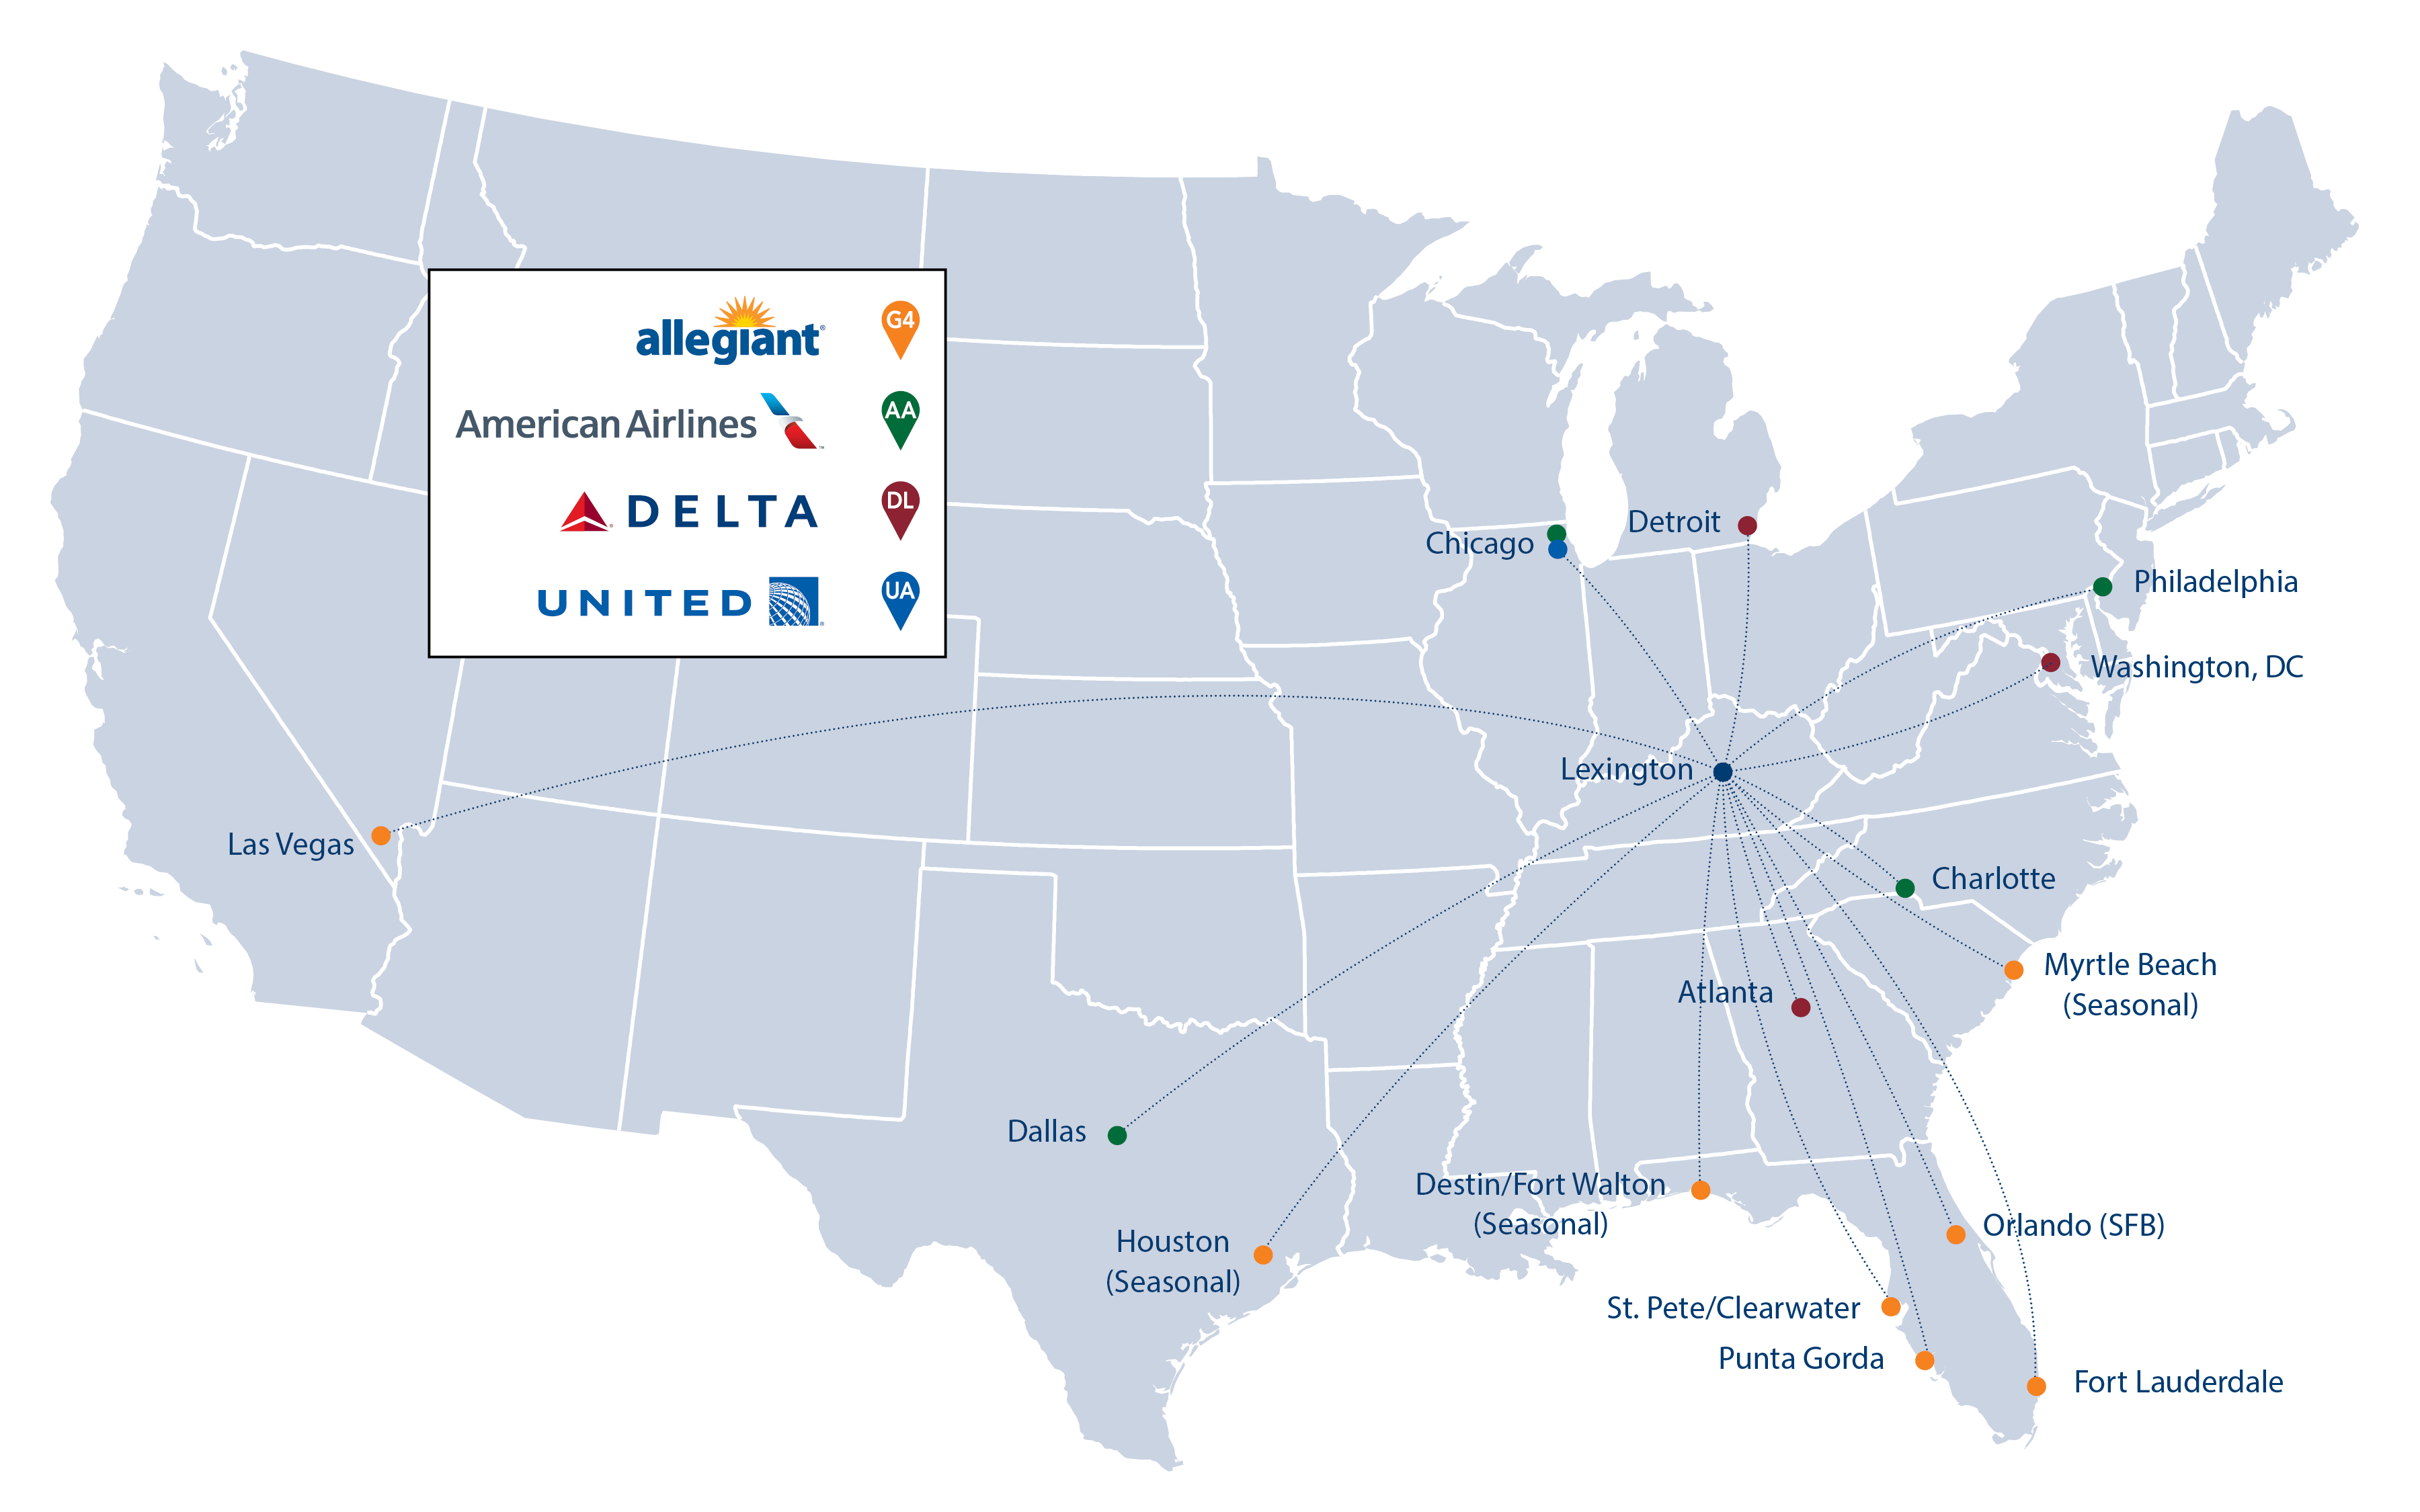 Blue Grass Airport (LEX) is serviced by four major airlines: Allegiant Air, American Airlines, Delta Air Lines, and United Airlines